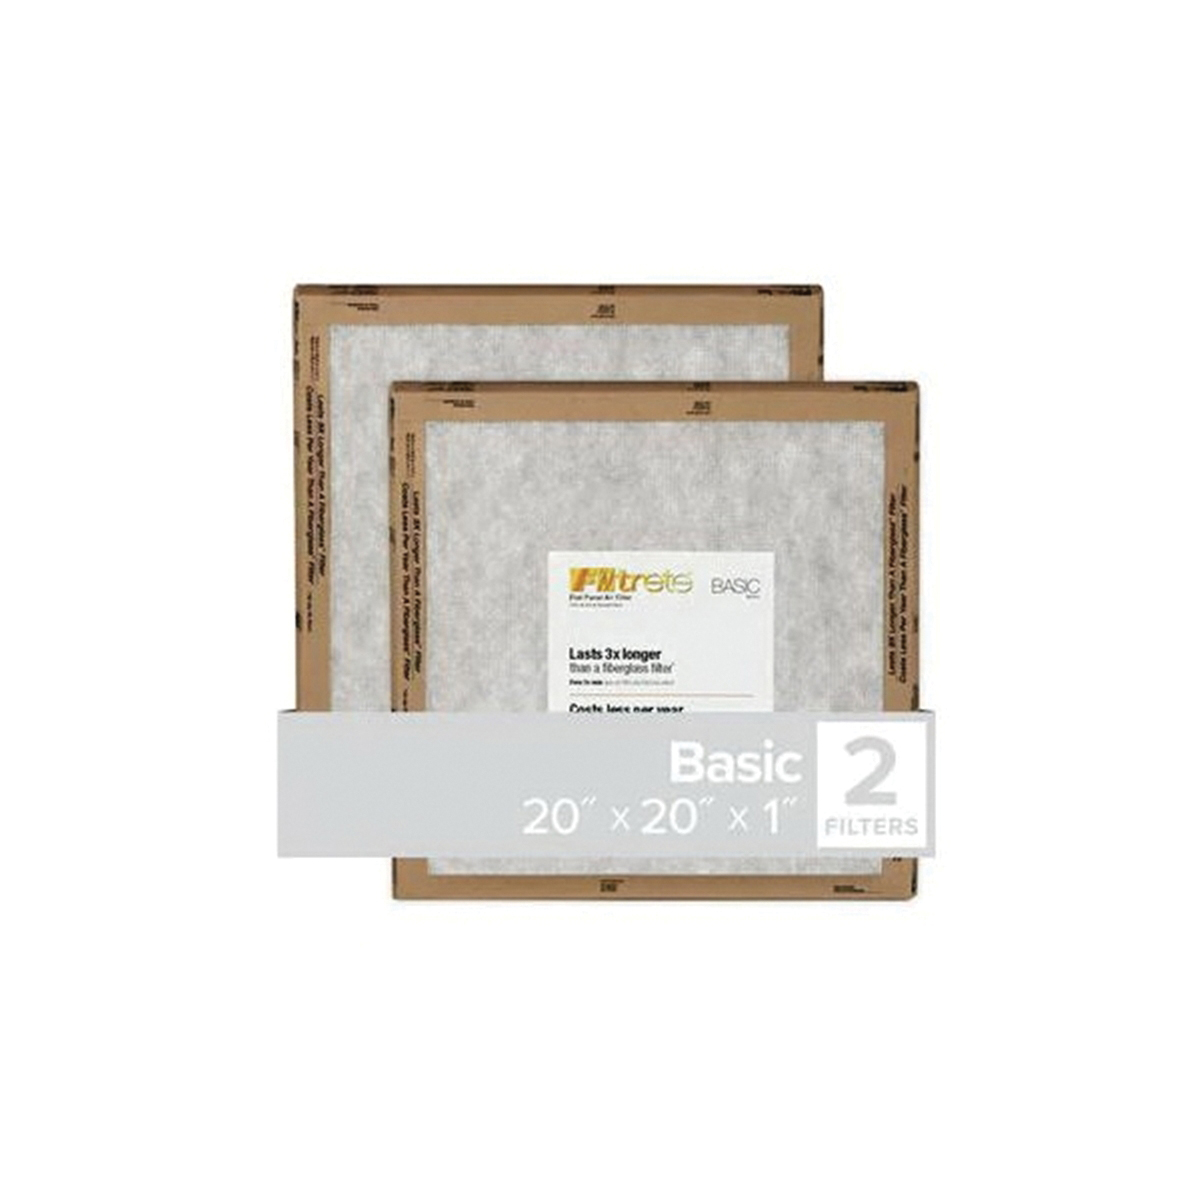 Filtrete FPL02-2PK-24 Flat Panel Air Filter, 20 in L, 20 in W, 2 MERV, For: Air Conditioner, Furnace and HVAC System - 3